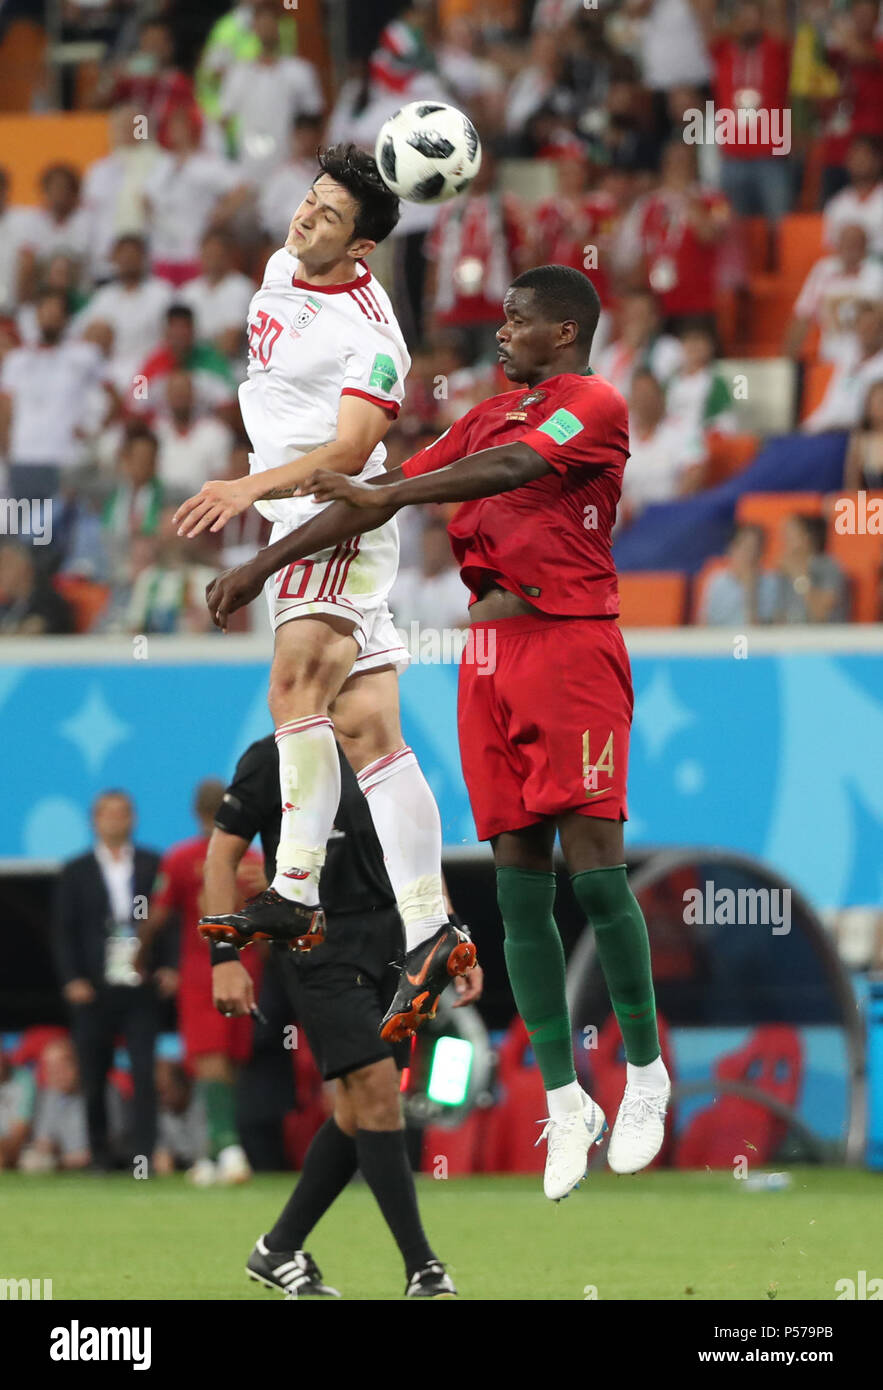 Saransk, Russia. 25th June, 2018. William Carvalho (R) of Portugal competes for a header with Sardar Azmoun of Iran during the 2018 FIFA World Cup Group B match between Iran and Portugal in Saransk, Russia, June 25, 2018. The match ended in a 1-1 draw. Portugal advanced to the round of 16. Credit: Ye Pingfan/Xinhua/Alamy Live News Stock Photo